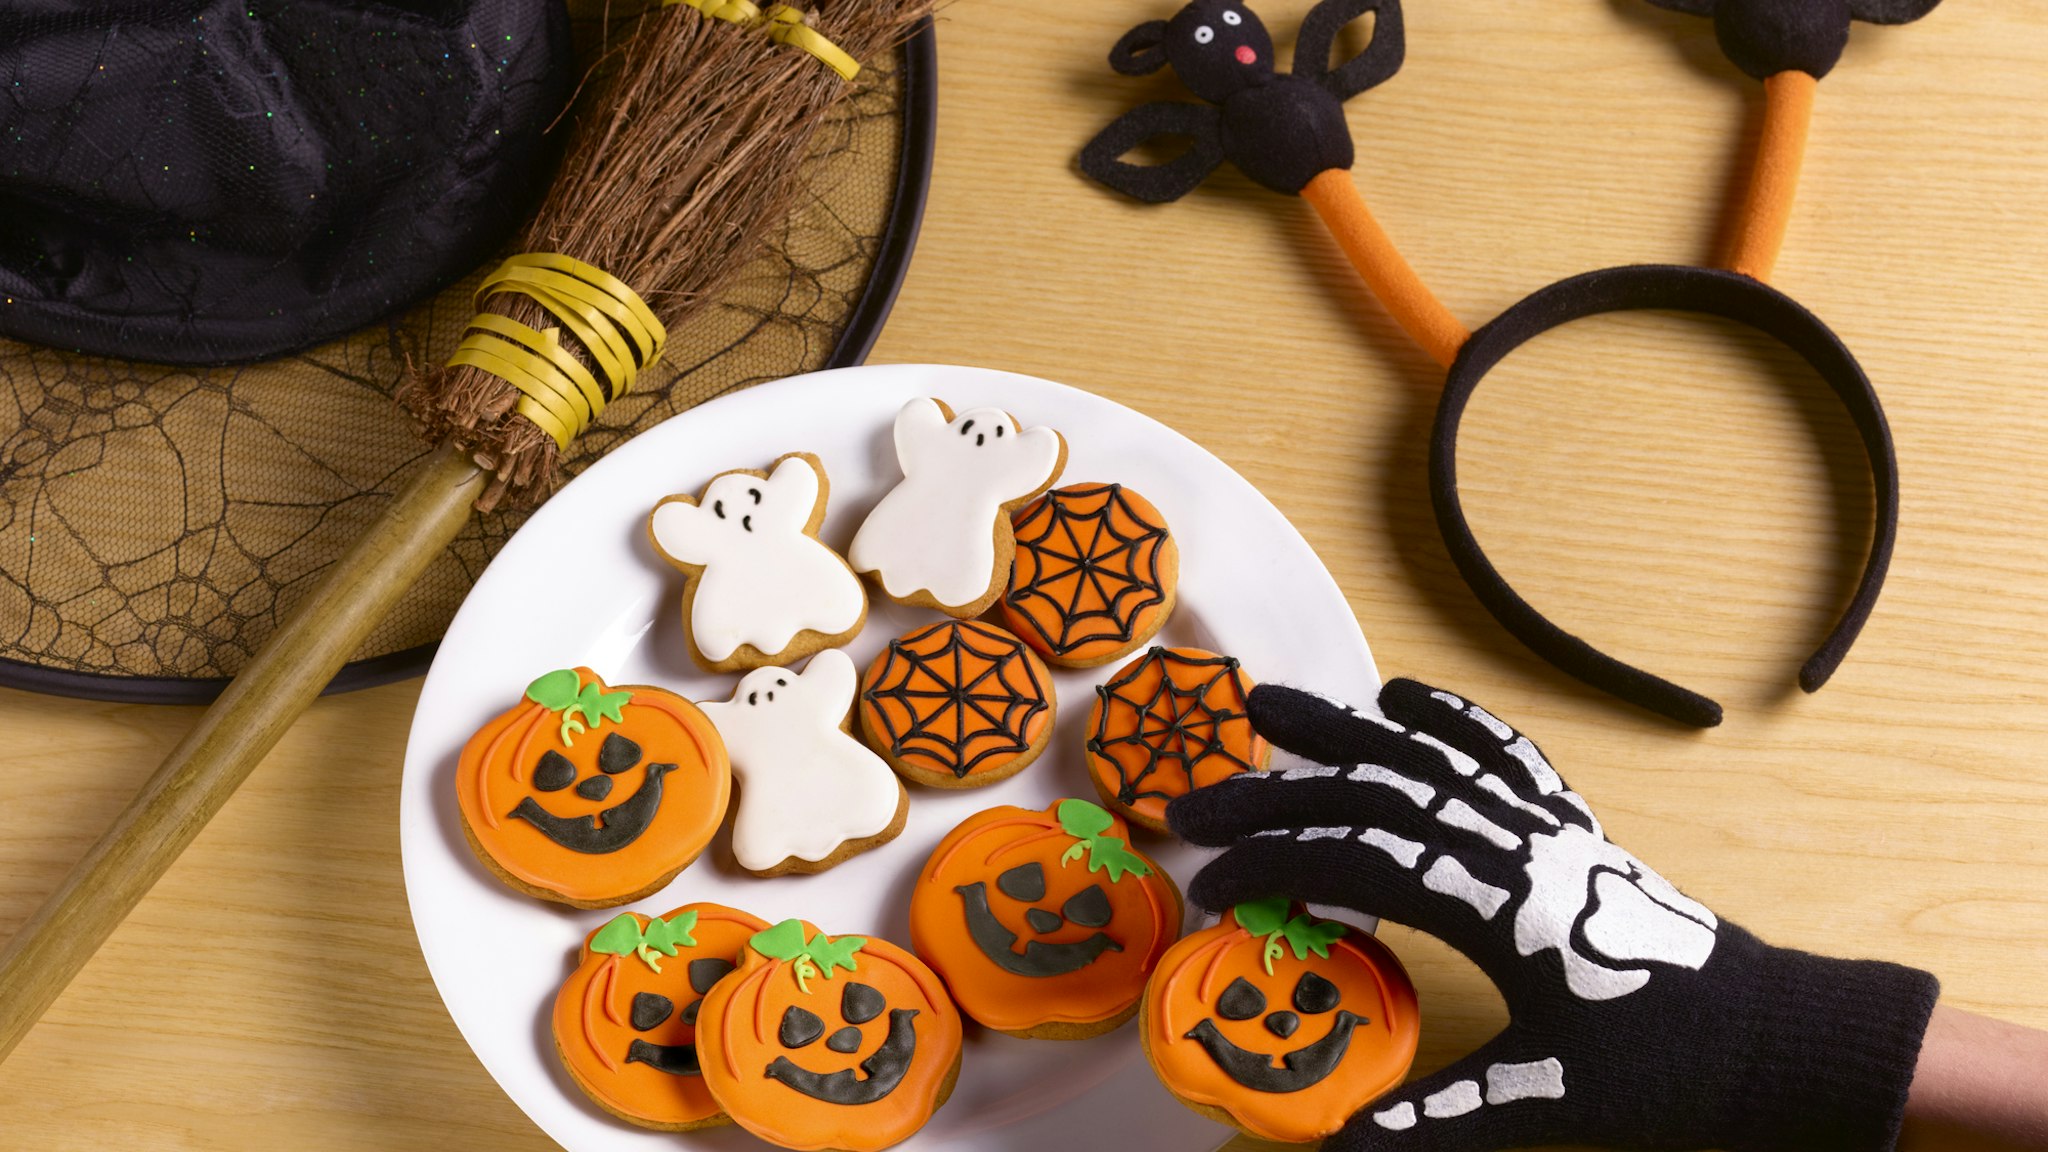 Halloween party with witches costume and cookies - stock photo